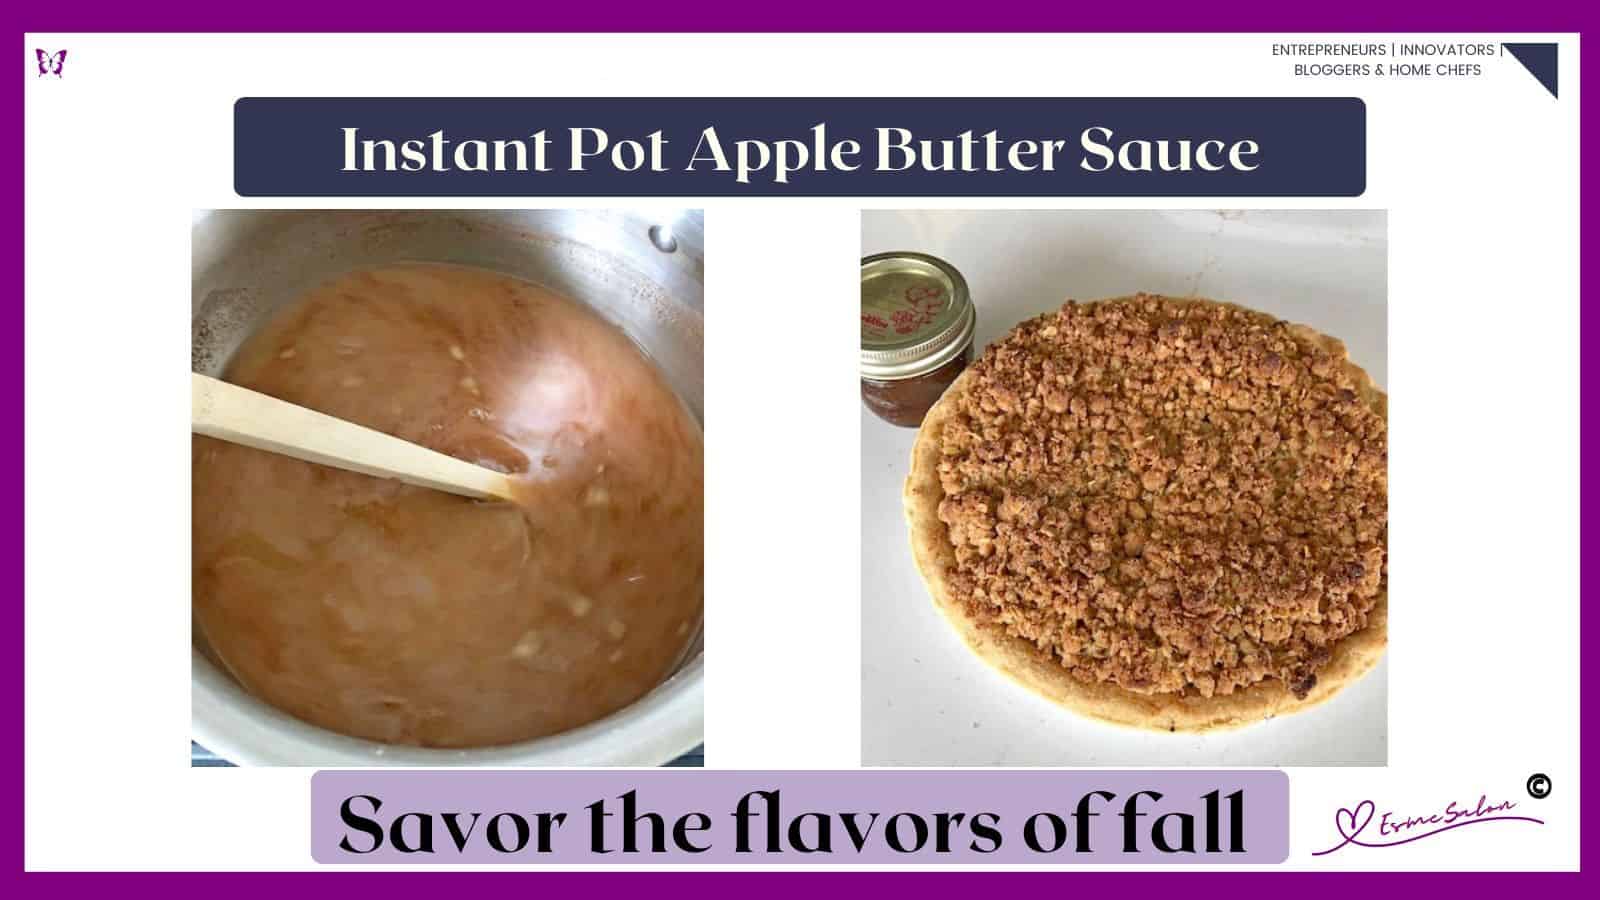 an image of a Console pot with lid filled with Instant Pot Apple Butter Sauce as well as an apple crumble pie with this sauce